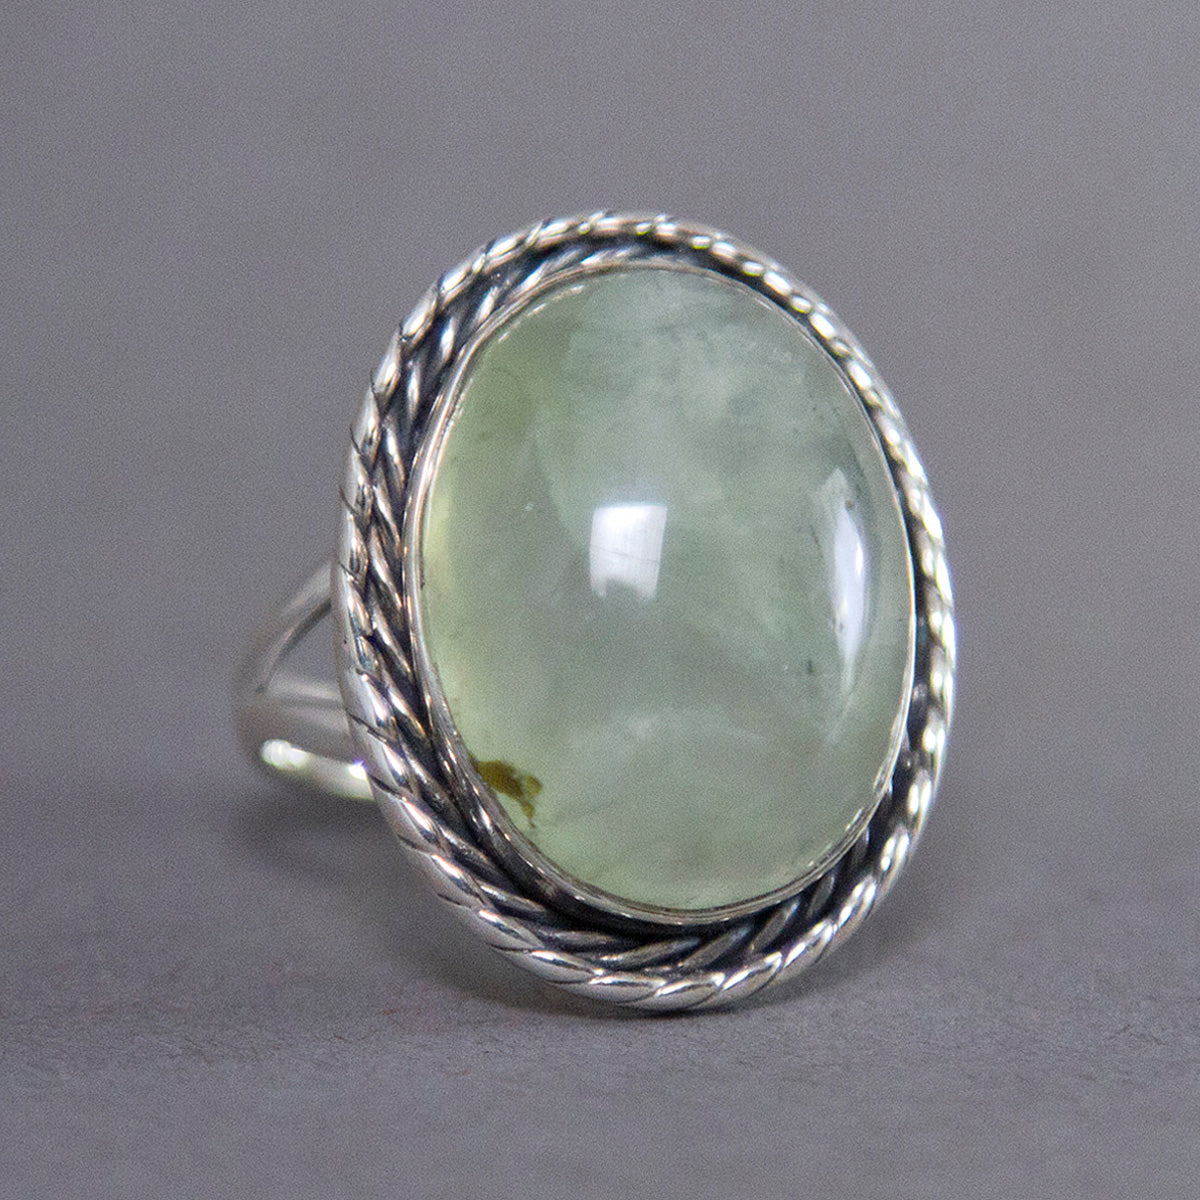 Prehnite Oval Entwine Sterling Silver Ring US 7.5 SS-017